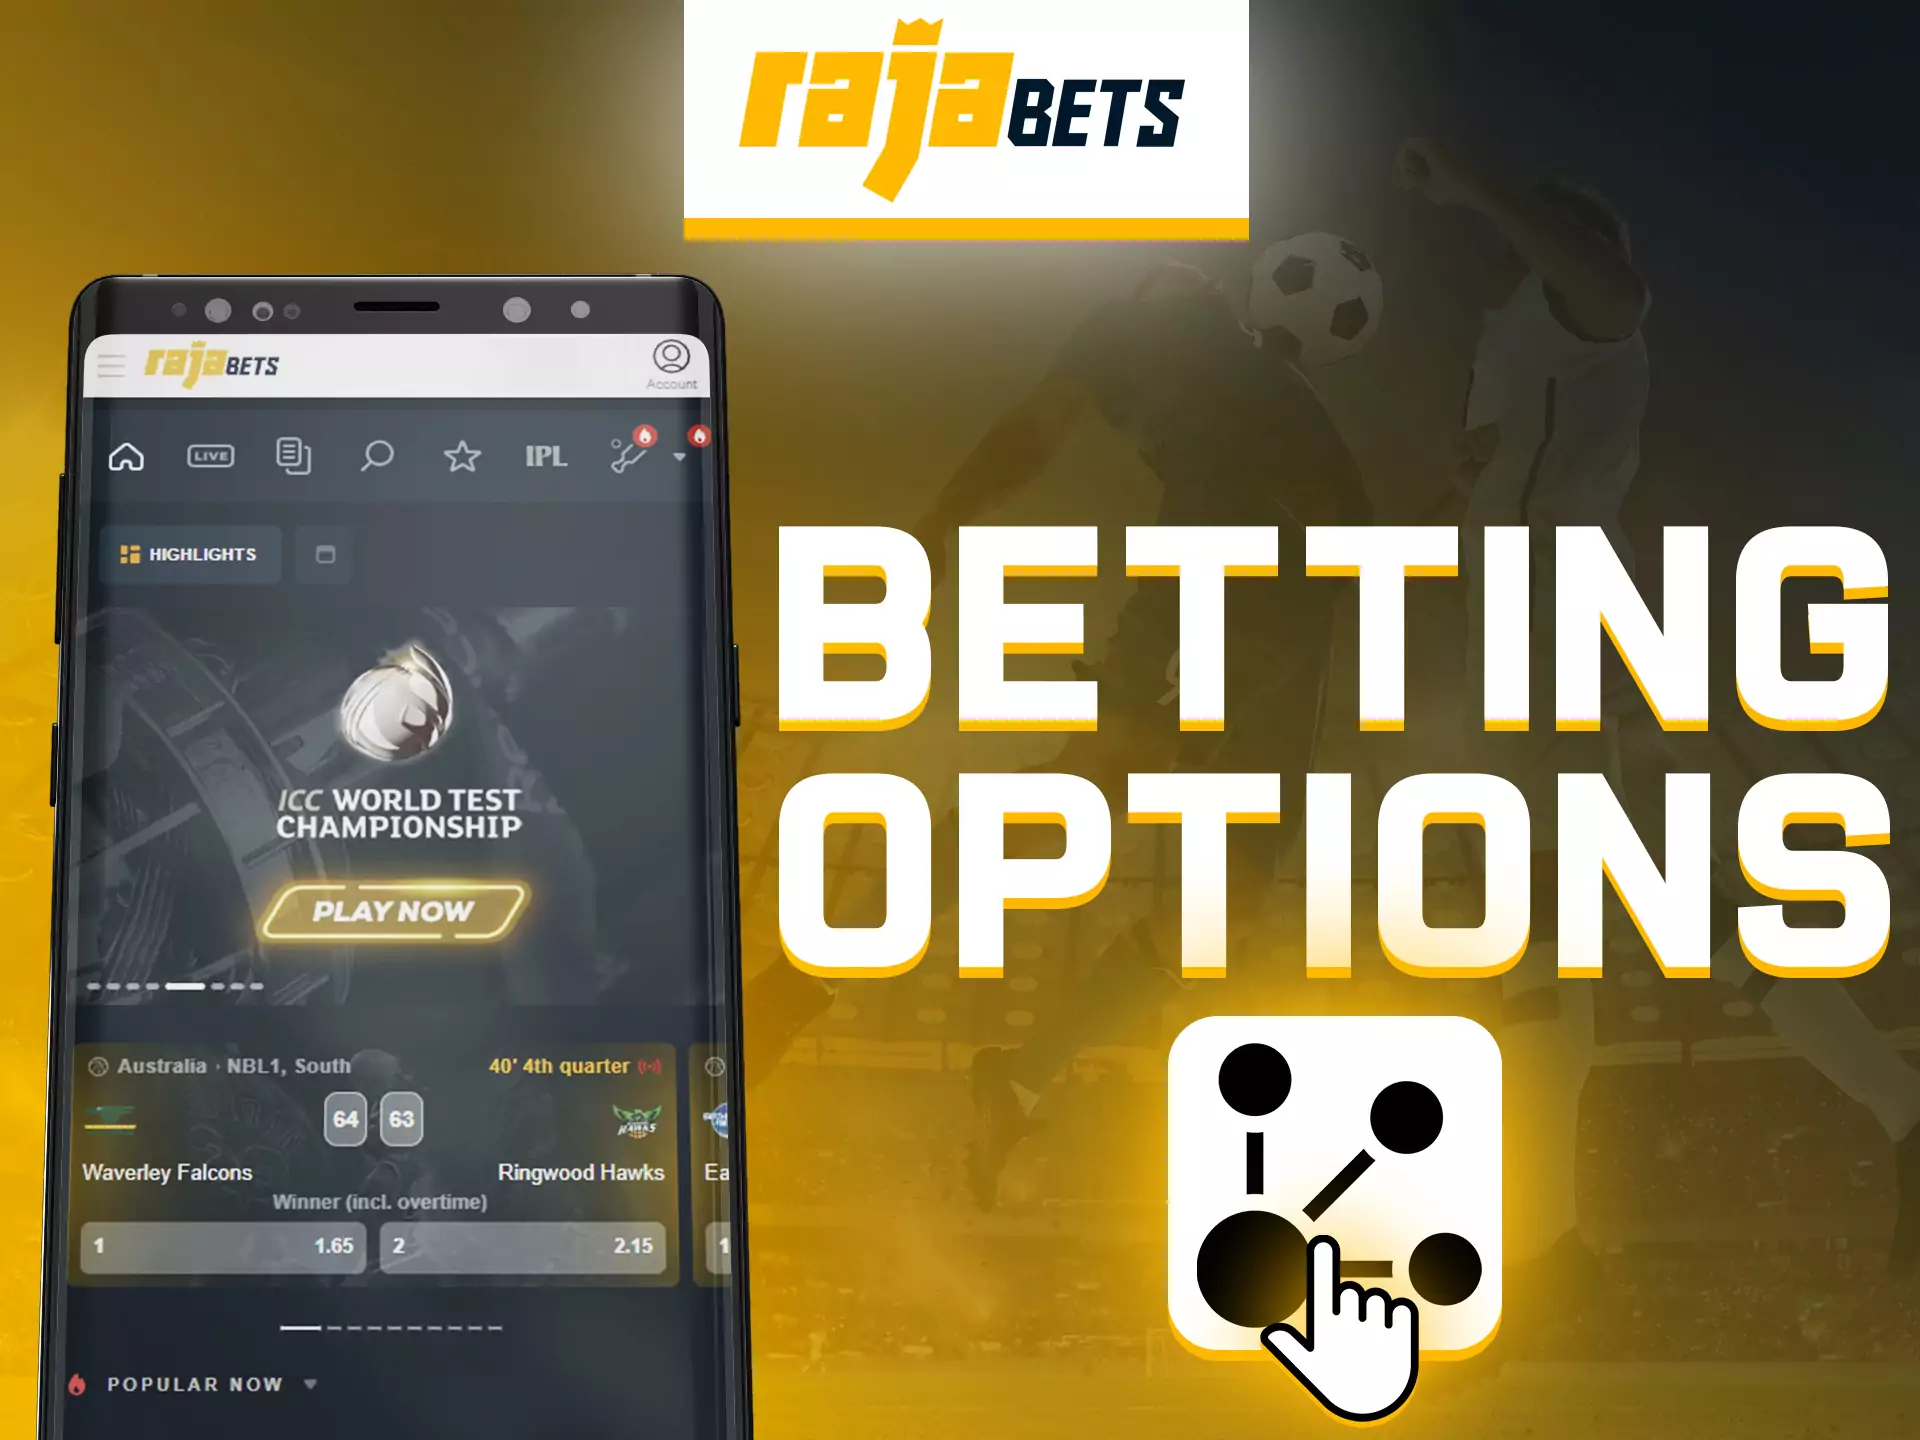 Rajabets app gives you a variety of options for betting on sports.